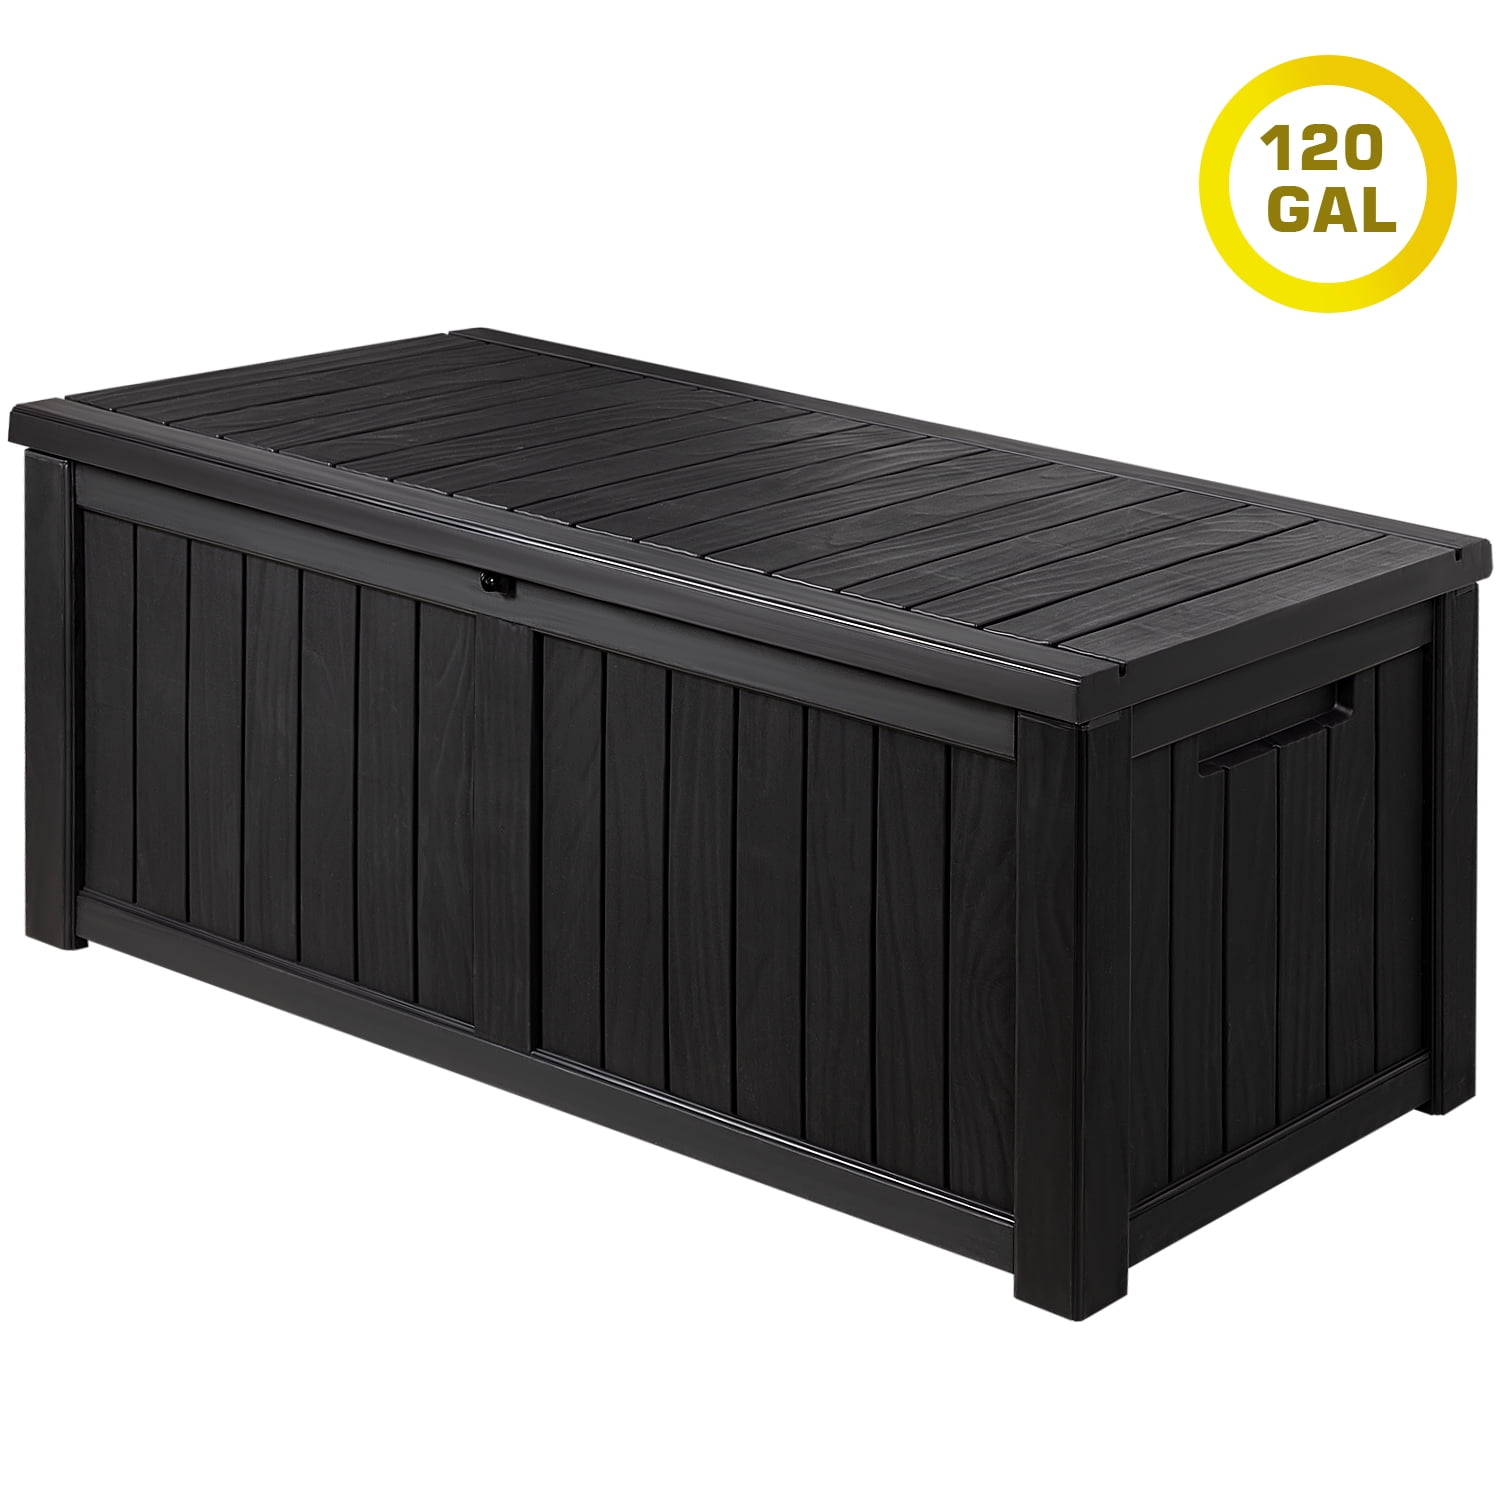 Rattan Waterproof Outdoor Storage Container Bin with Wheels and Handrails for Yard Patio Swimming Pool Outdoor Storage Box Deck Box Black 120 Gallon Patio Storage Box 